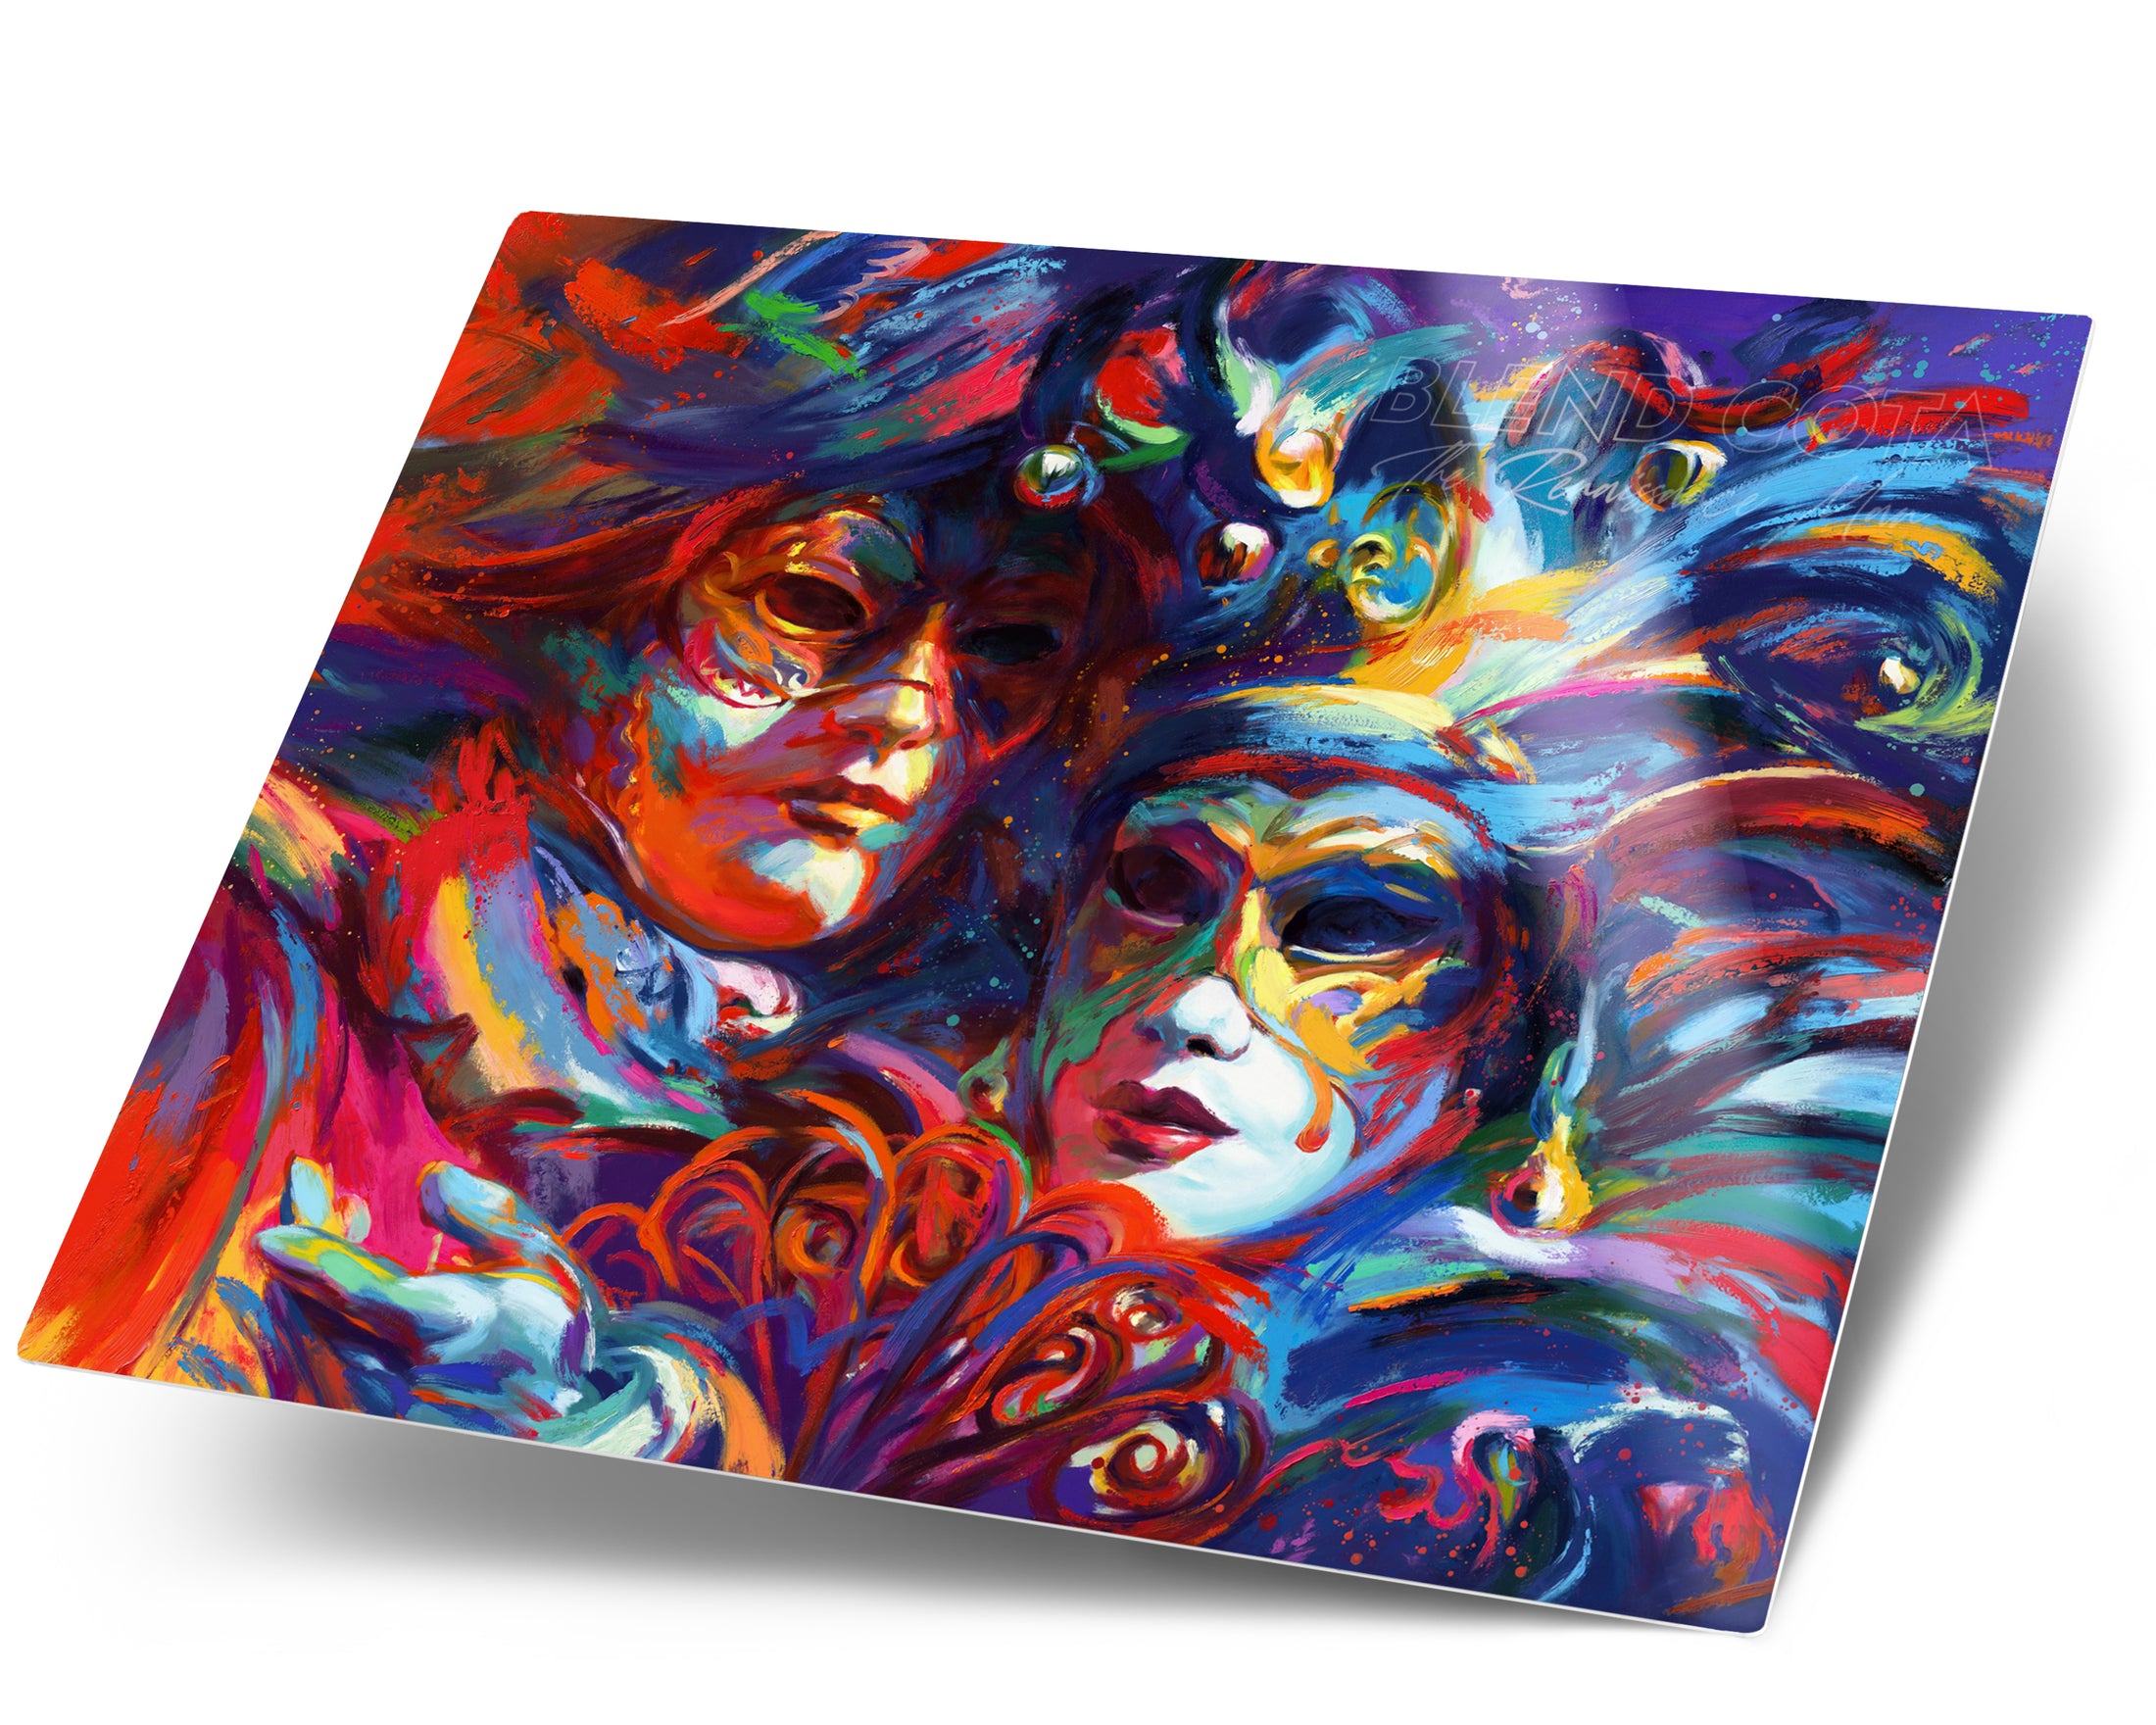 Art print on metal of blue, red and purple against the night sky, mystery and beauty surround these Venetian masks of Italy, Venice, the city of water holds many entrancing delights and dances in colorful brushstrokes, color expressionism style.